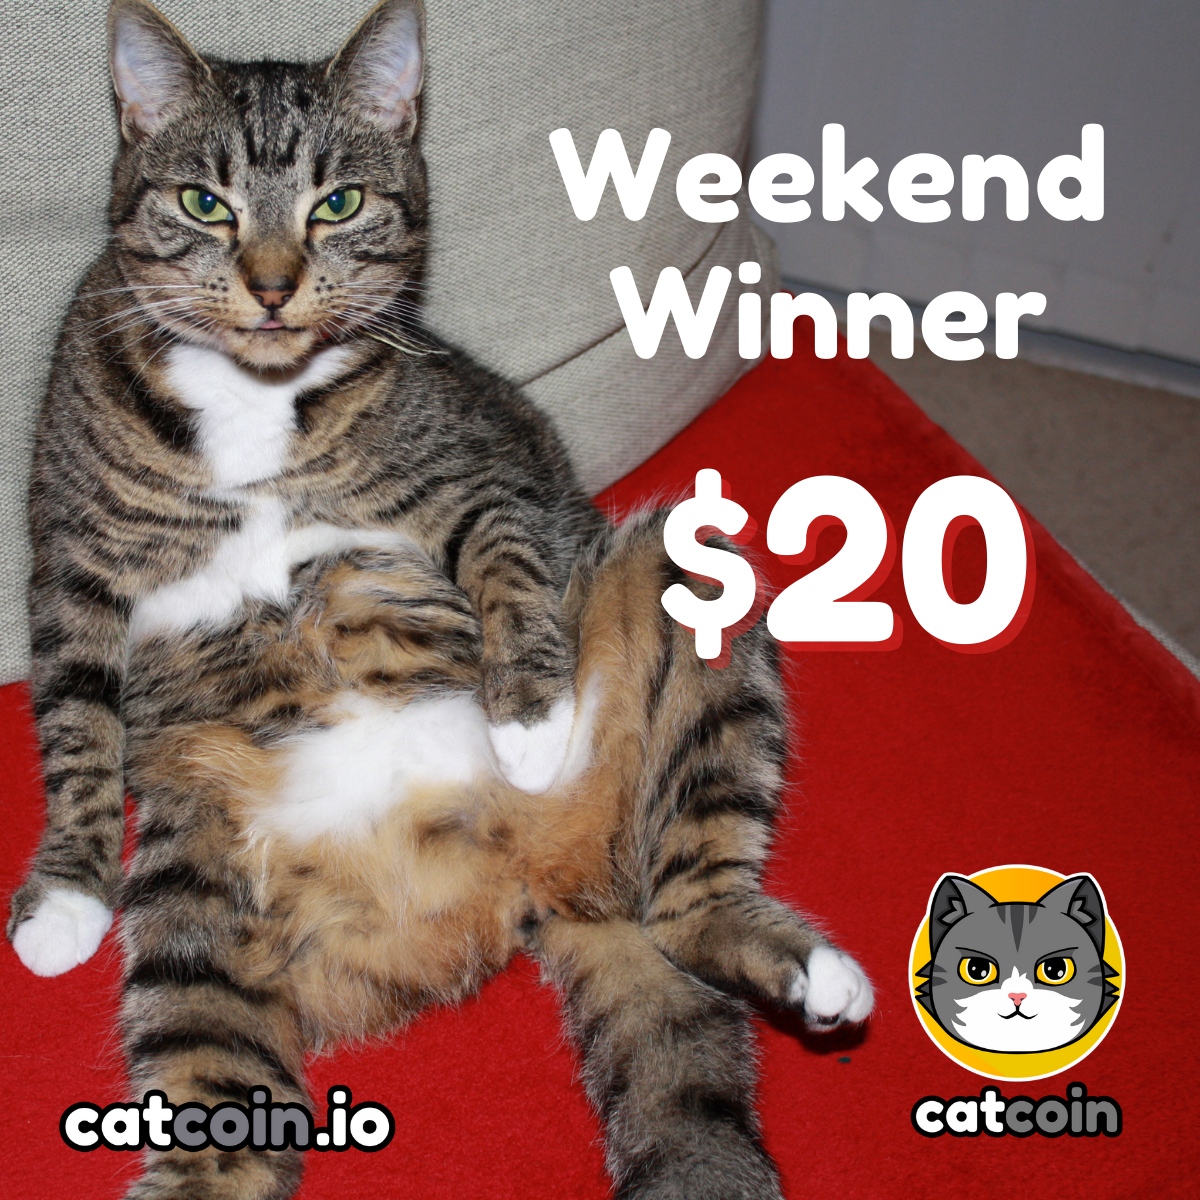 Here's to the weekend - $20!

• Follow @officialcatcoin
• Retweet
• And comment #Catcoin #BUSD #giveaway

Ends June 17th at 8am UTC